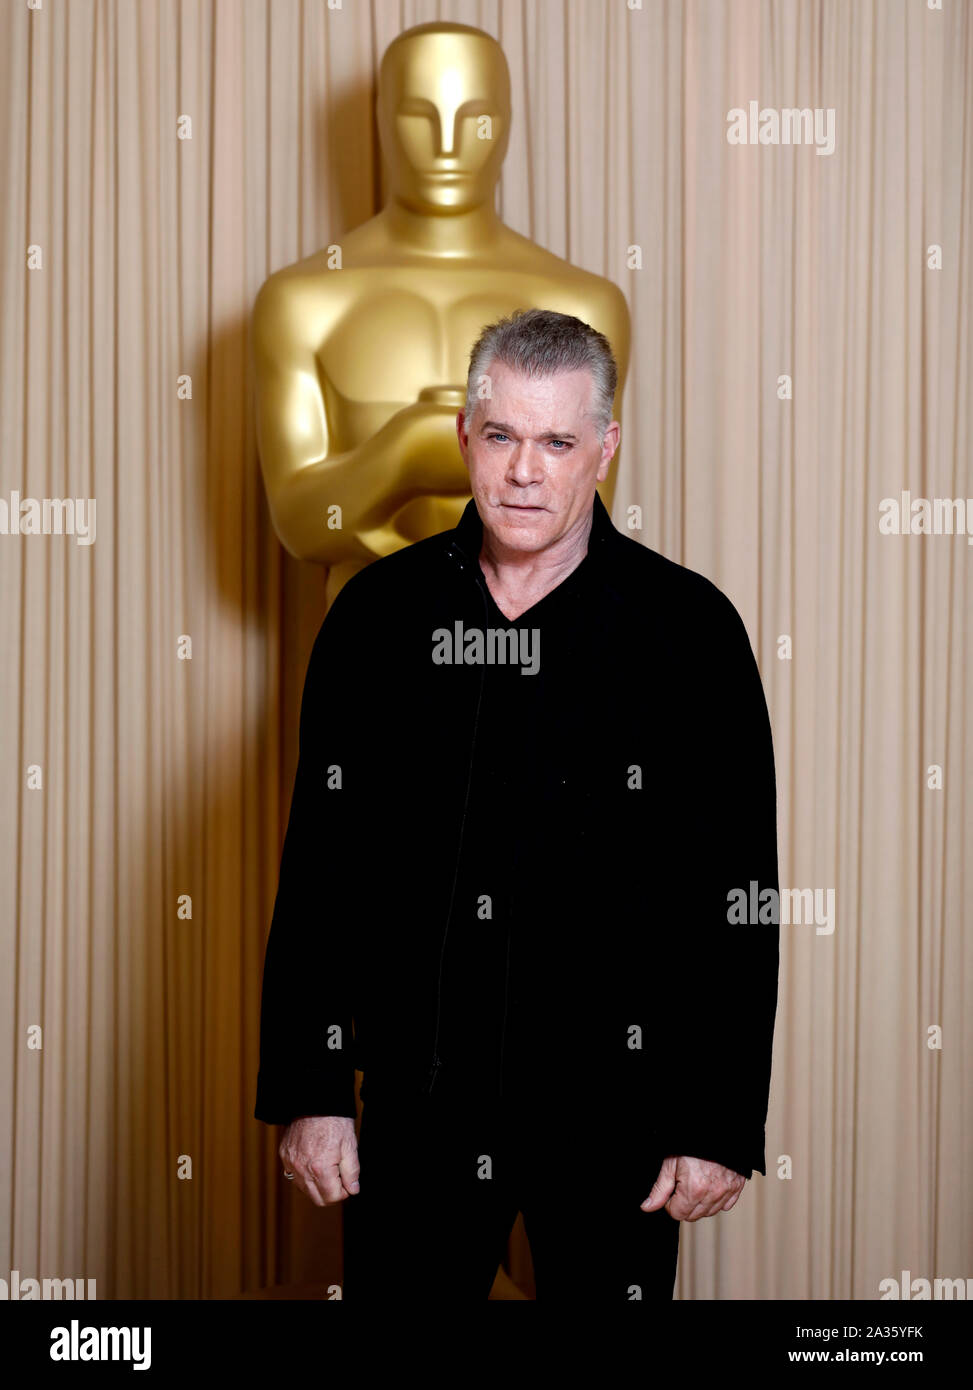 Ray Liotta attending the Academy of Motion Picture Arts and Sciences New Members Party 2019 held at the Freemasons Hall in London. Stock Photo